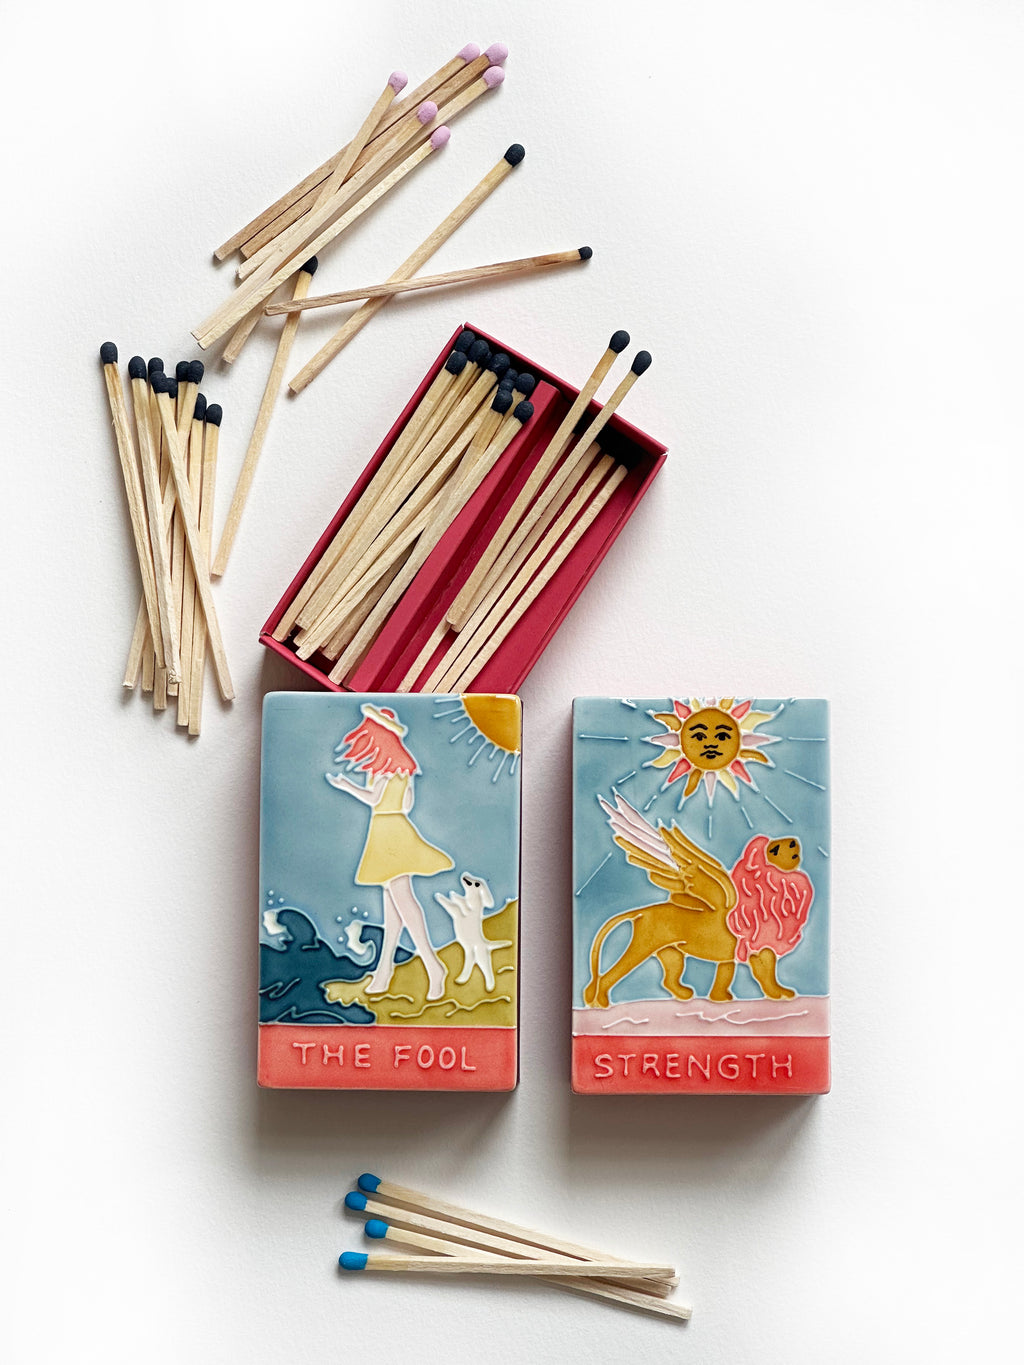 Long luxury safety matches for Jo Laing ceramic matchboxes